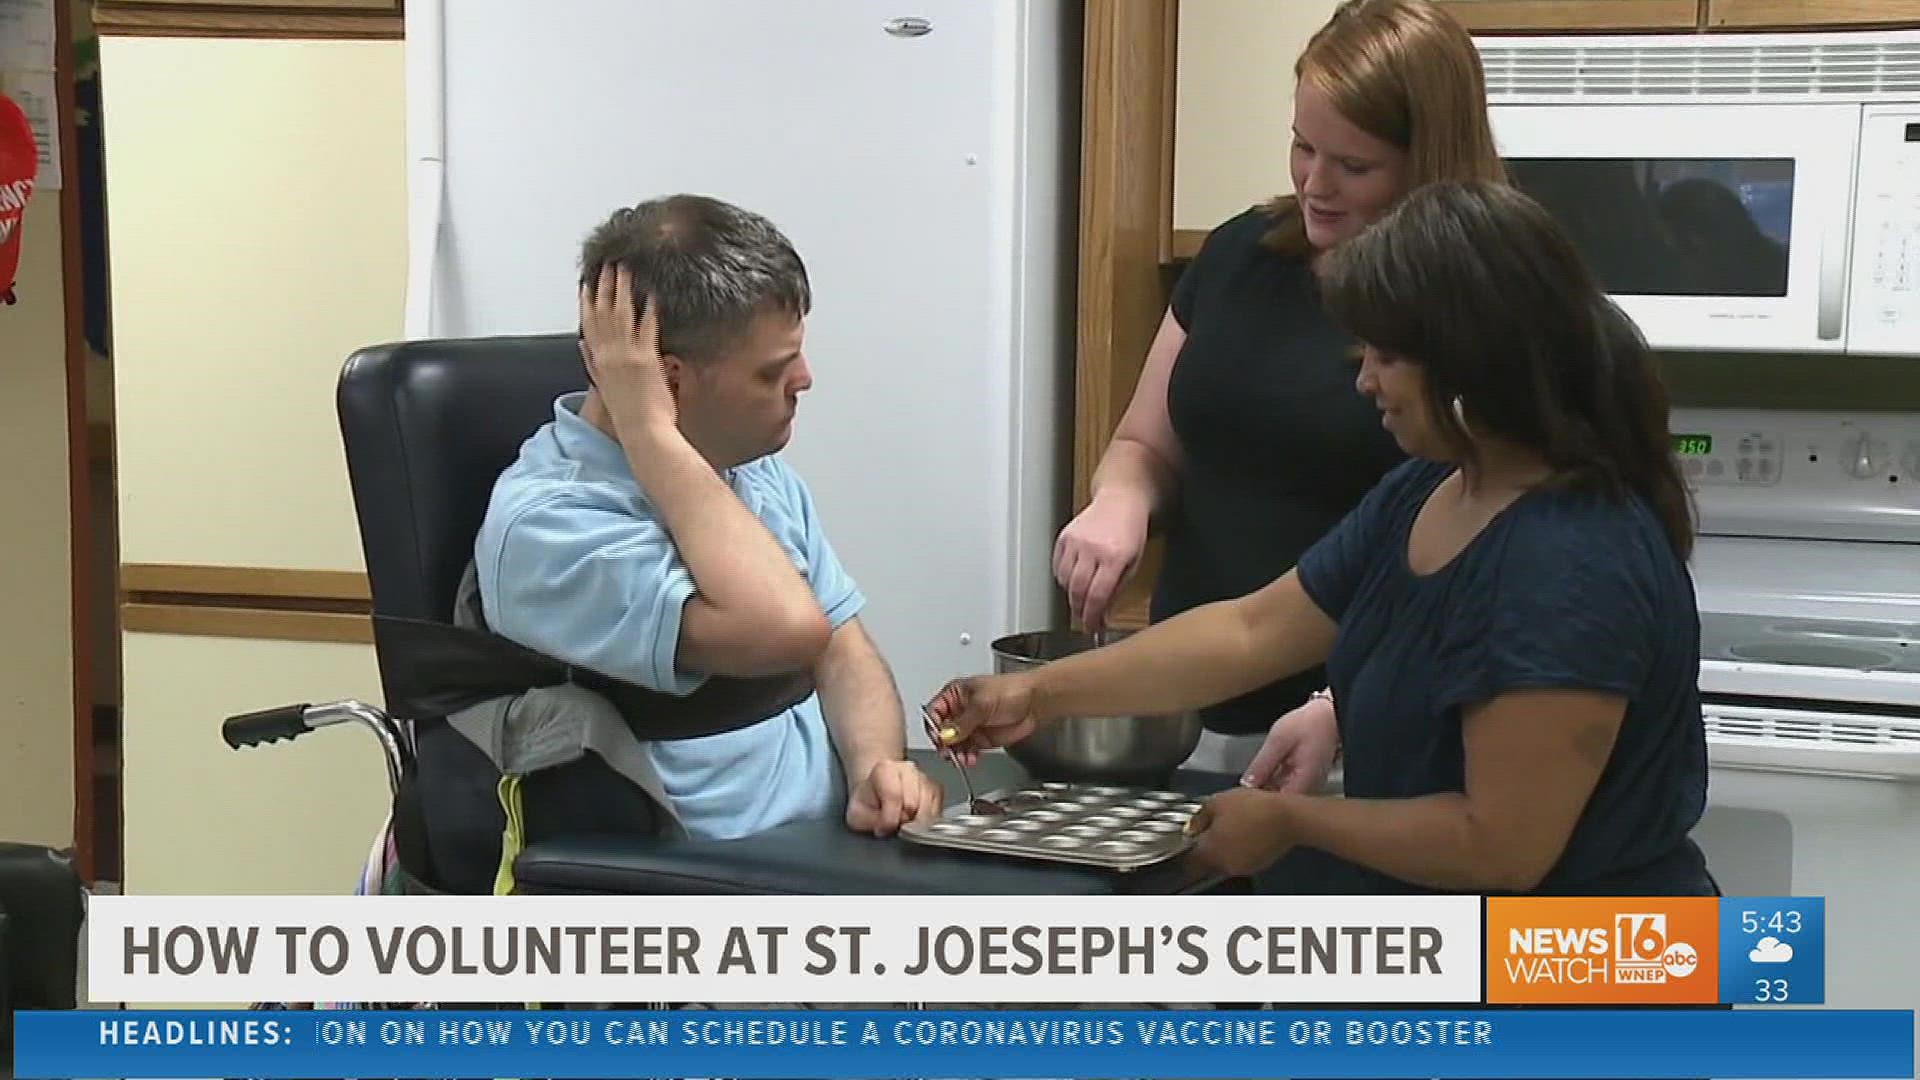 Another spot to volunteer at is St. Joseph’s Center in northeastern Pennsylvania.